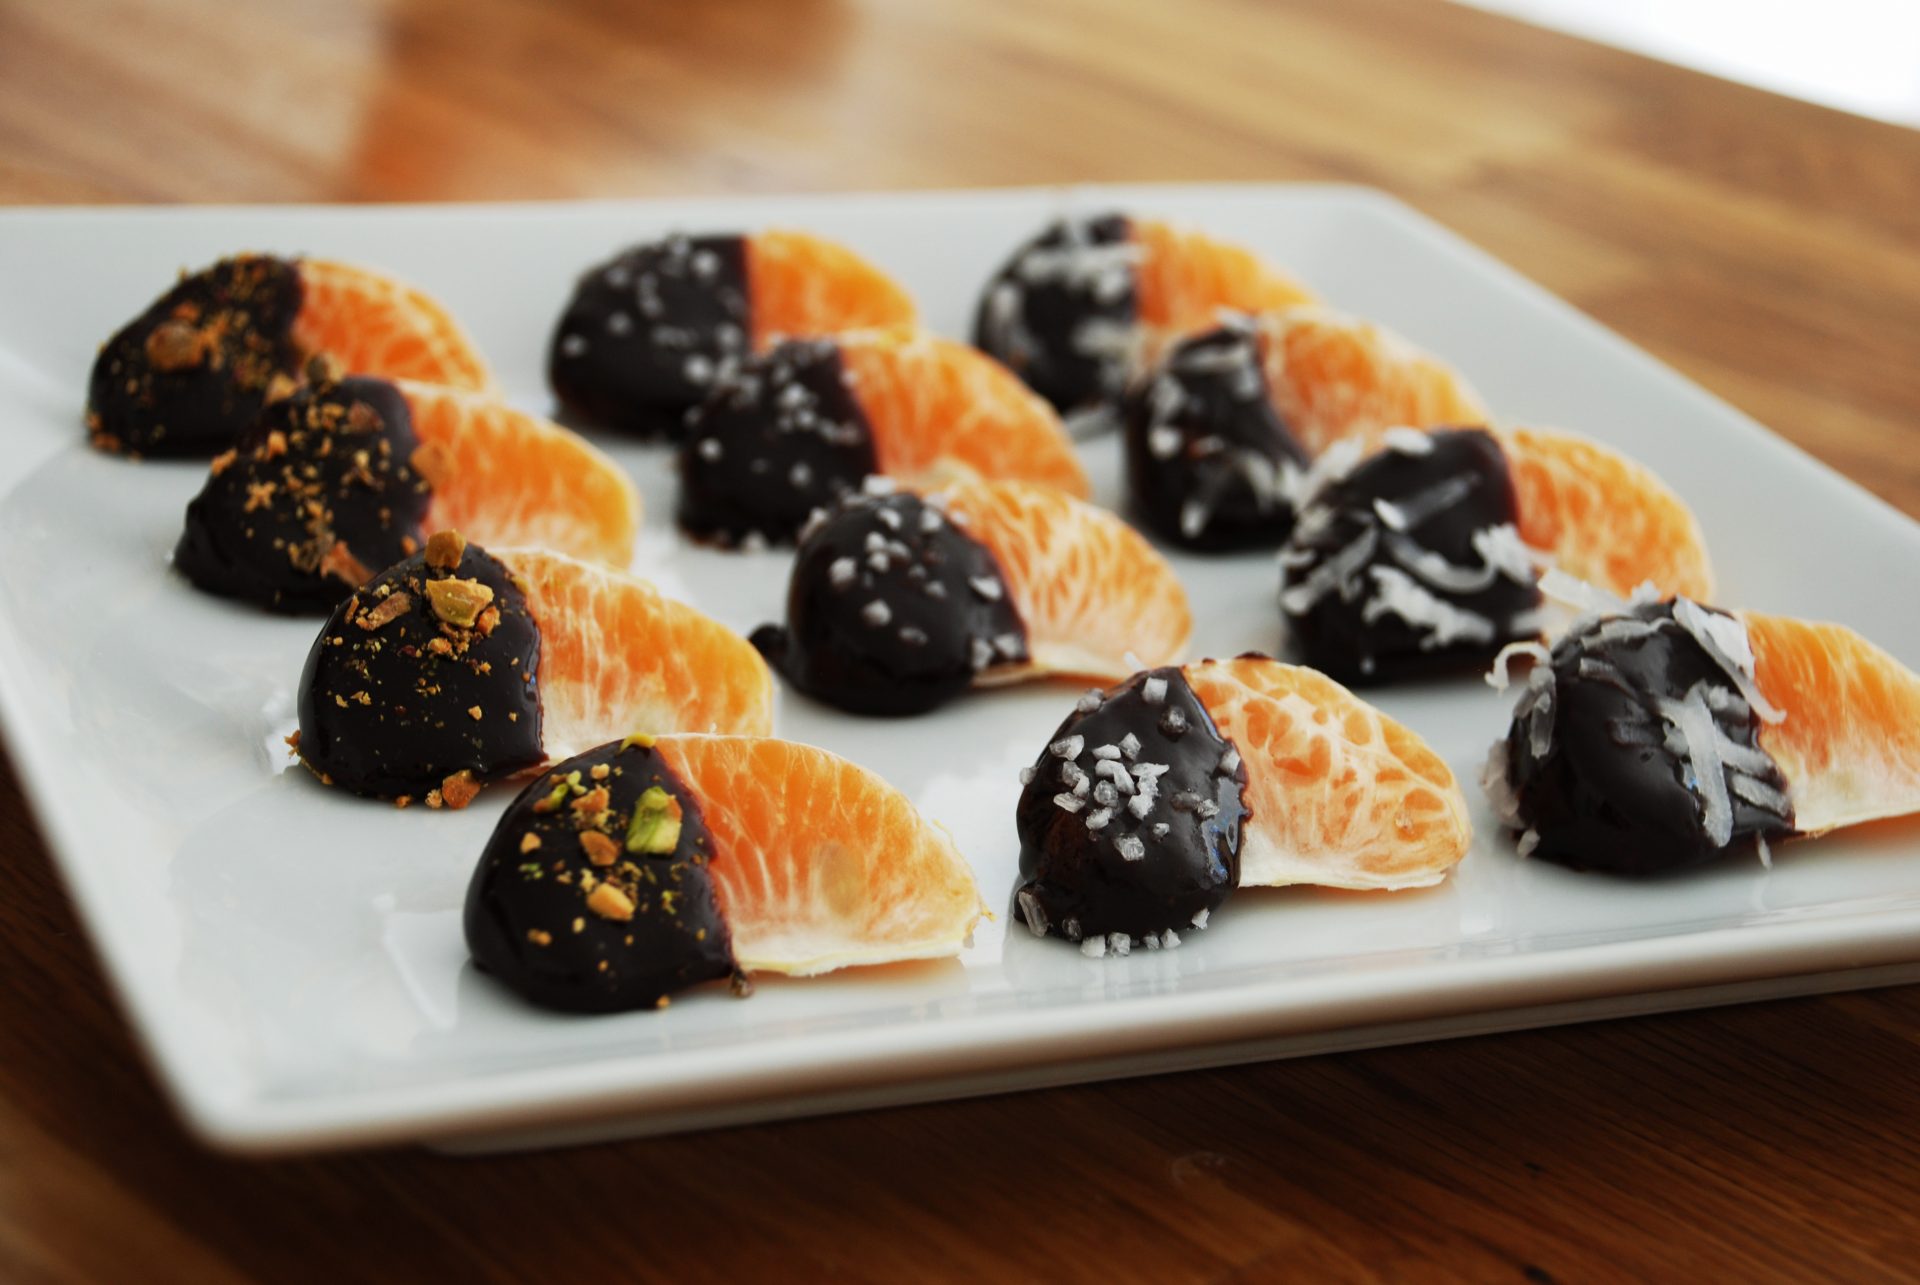 Chocolate dipped tangerines sprinkled with nuts on white plate on wooden countertop